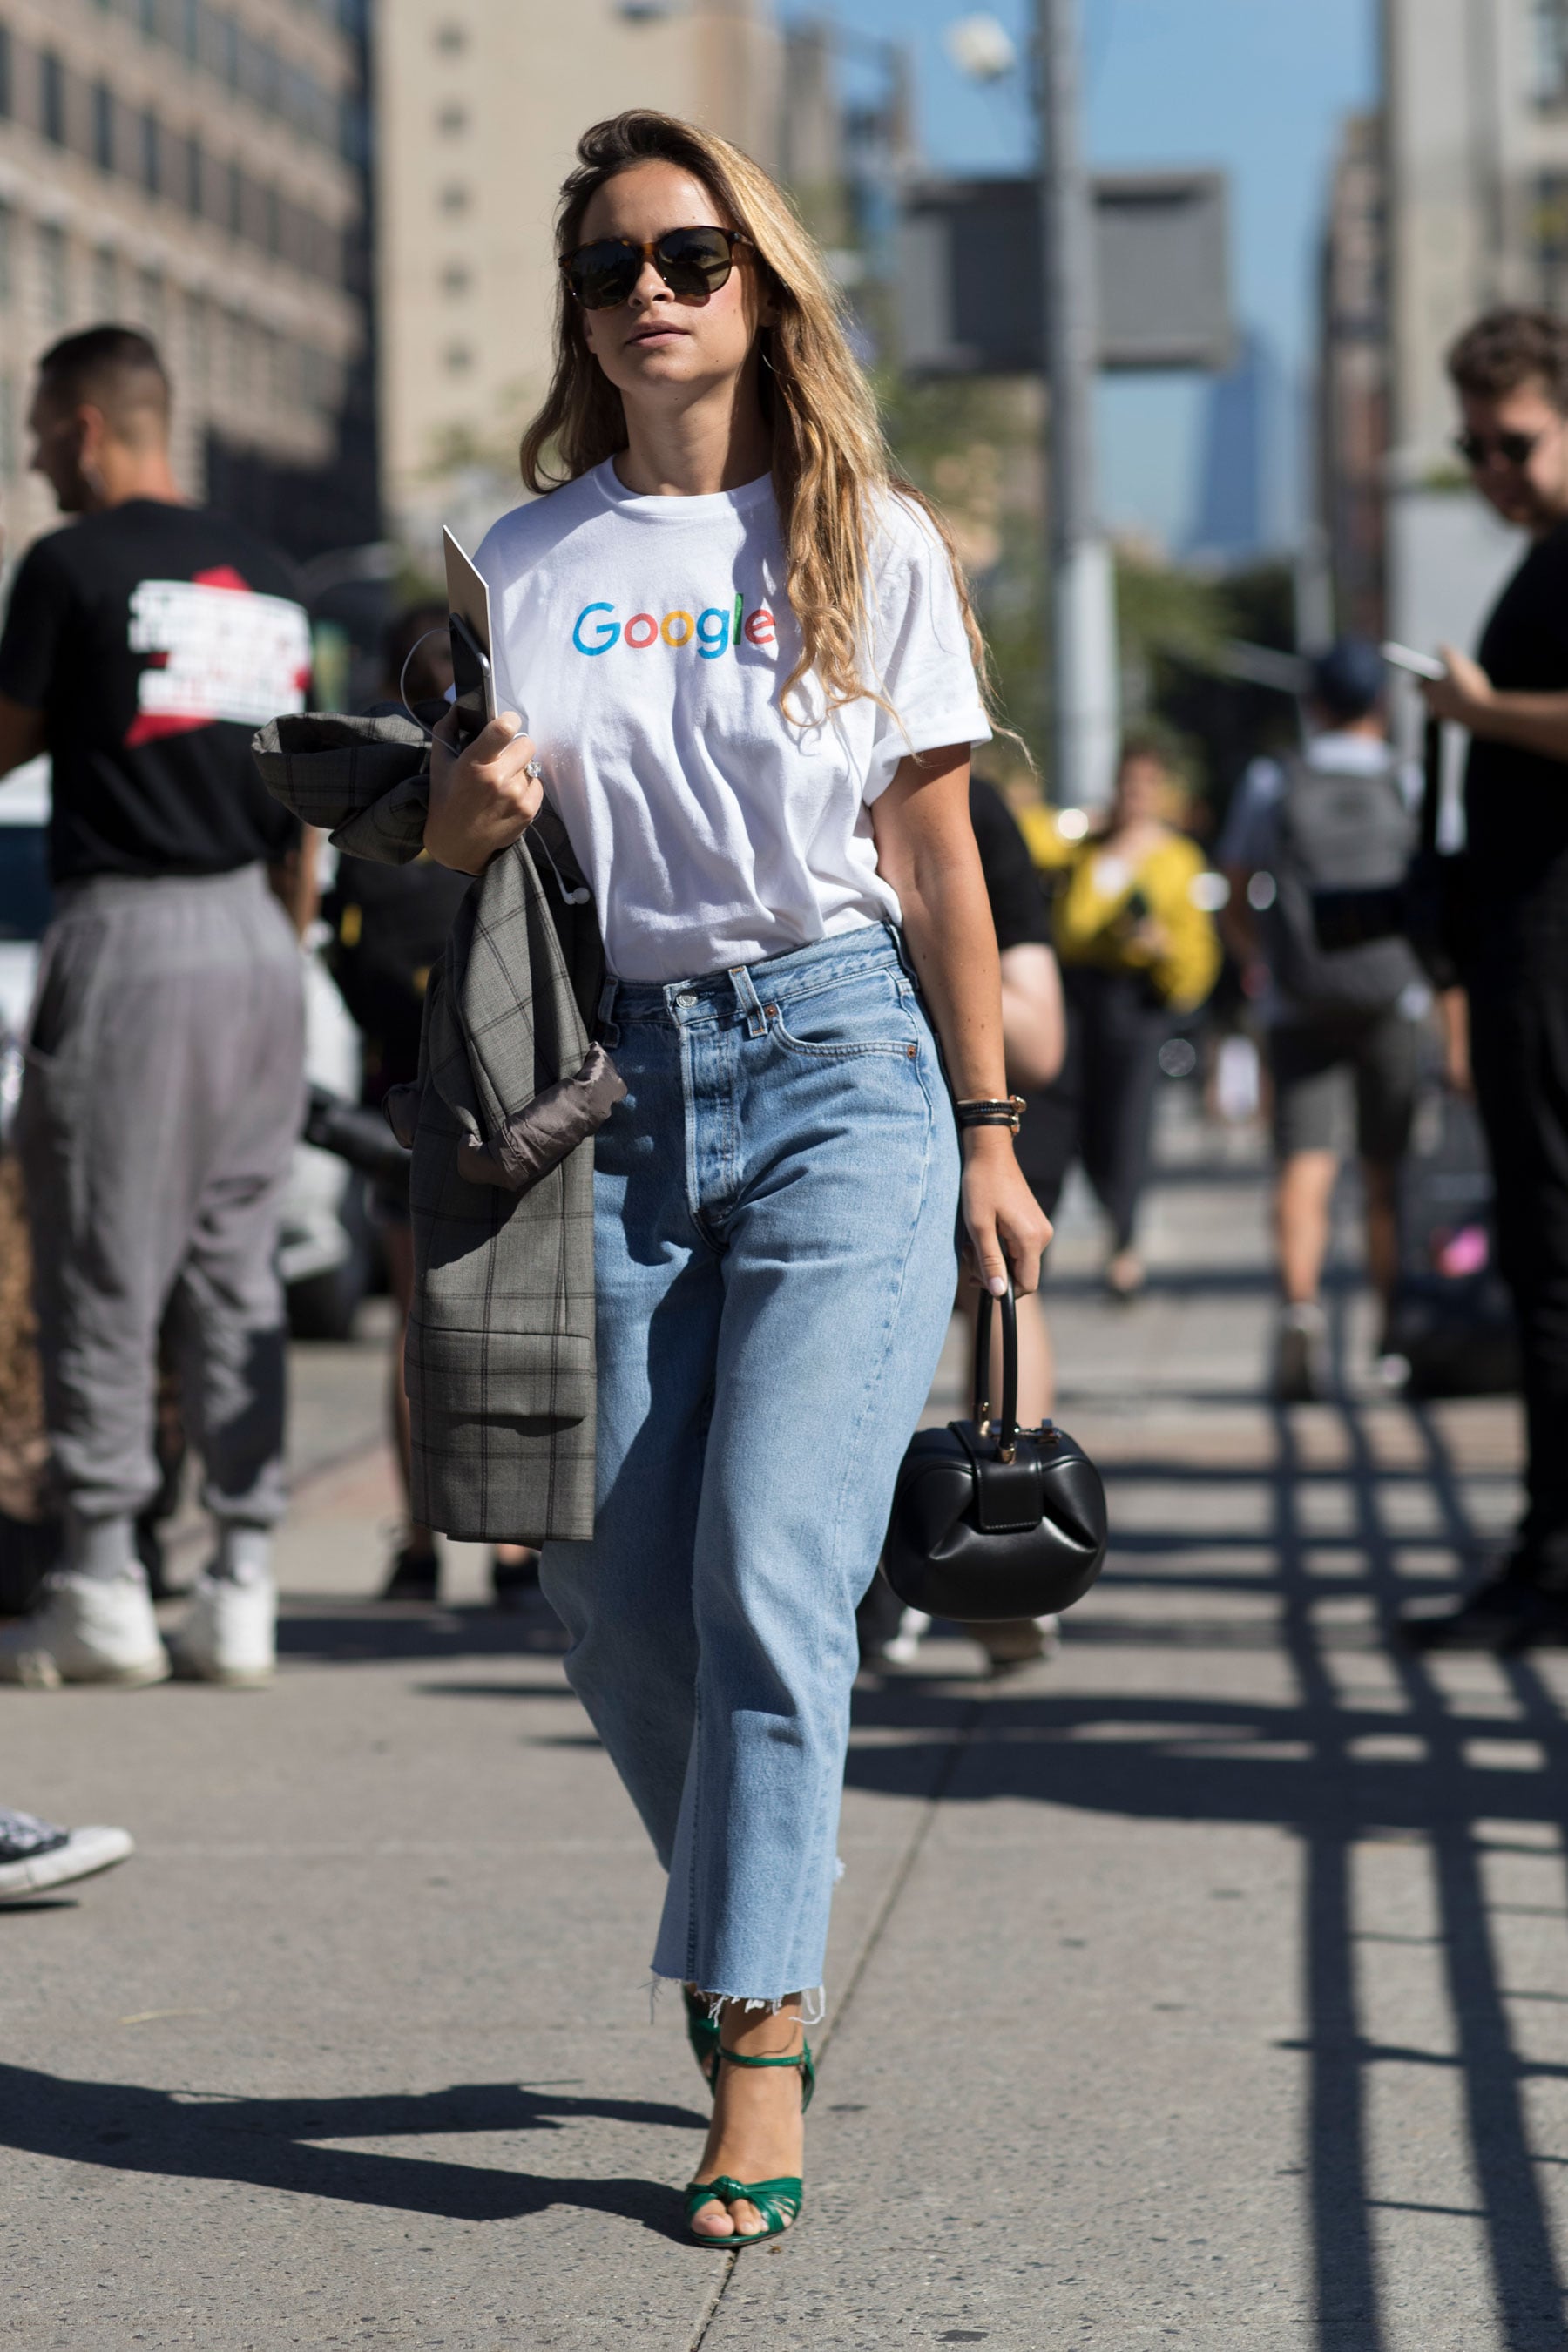 How to Make Jeans Look Fashionable